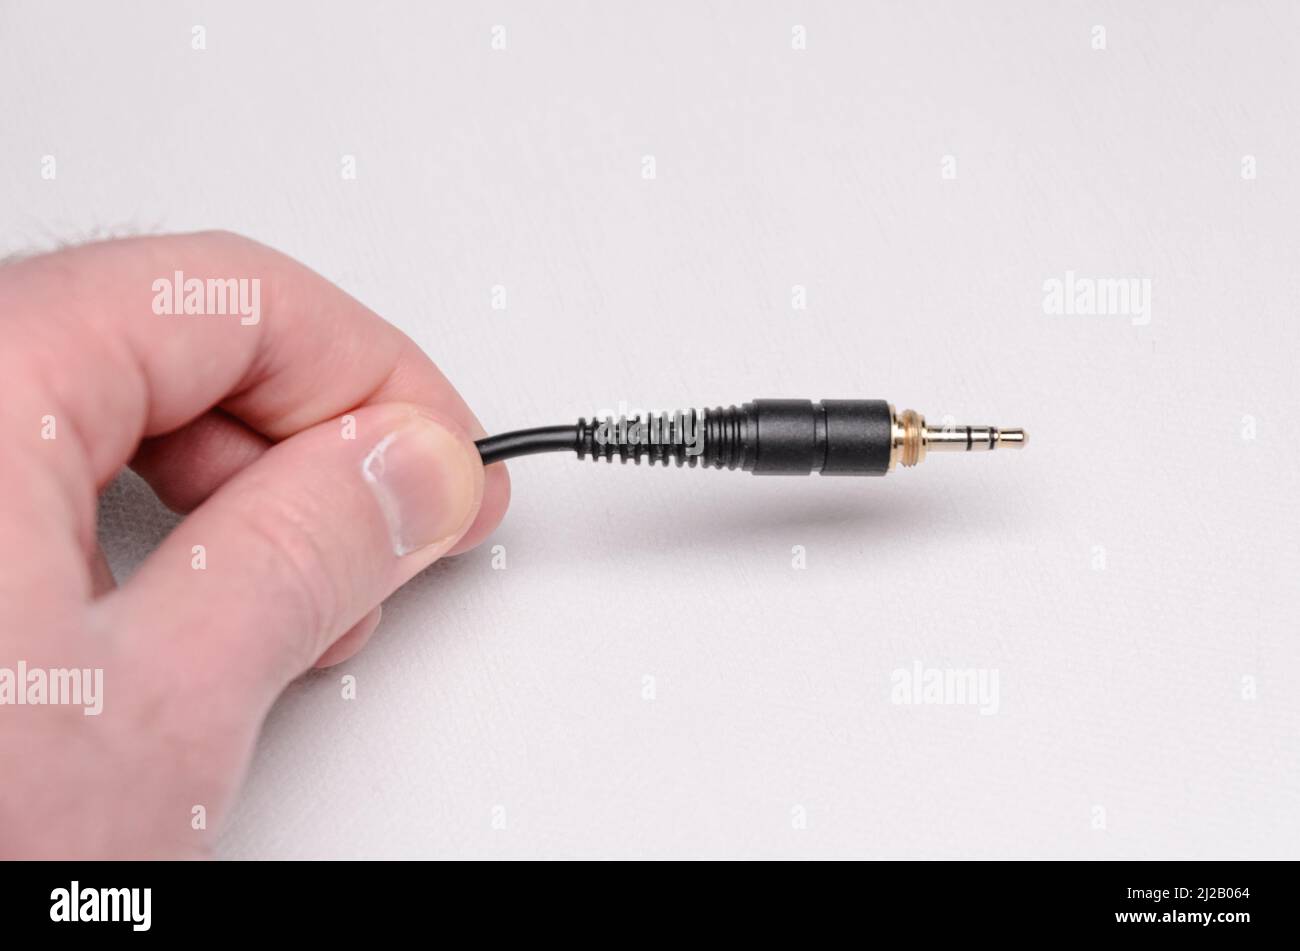 Holding a 3.5mm stereo headphone jack connector and cable for analog audio signals on white background Stock Photo